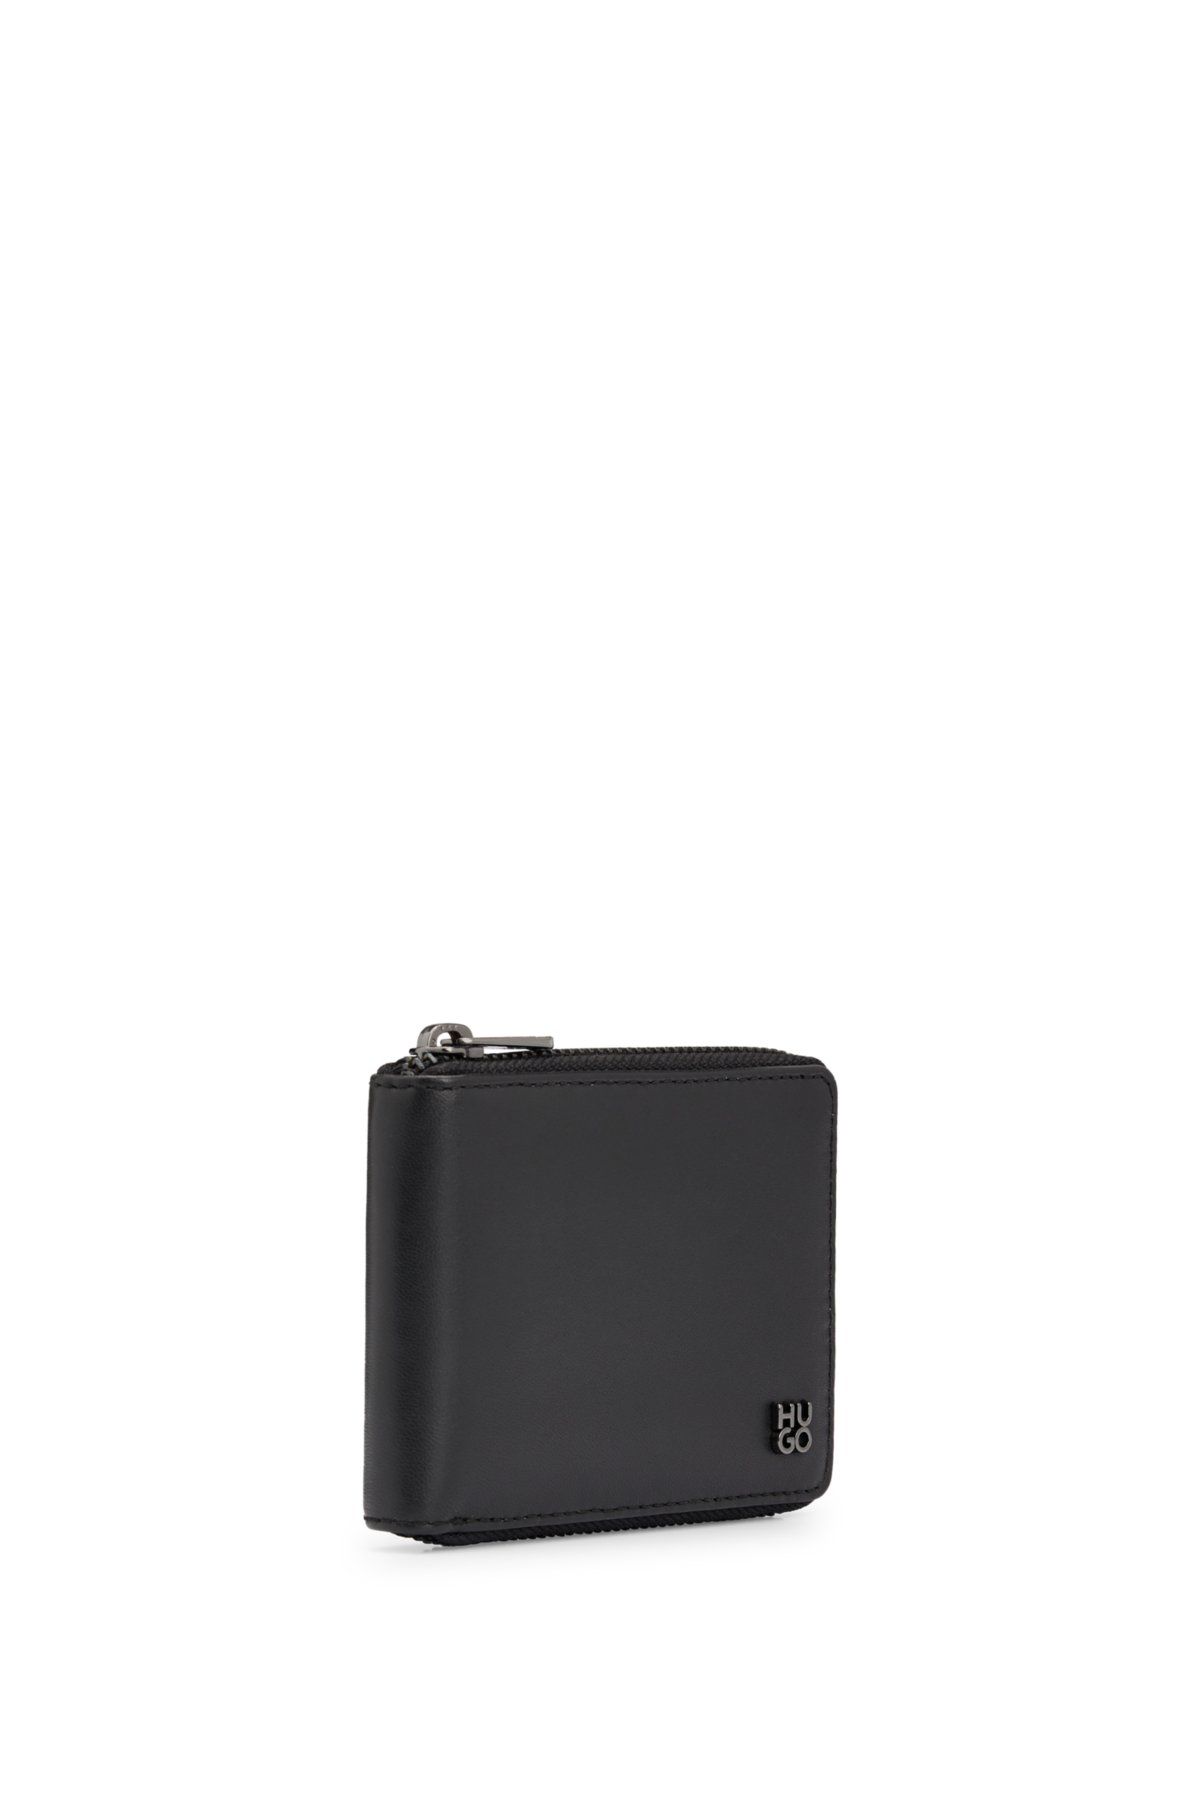 Matte-leather ziparound wallet with stacked logo, Black